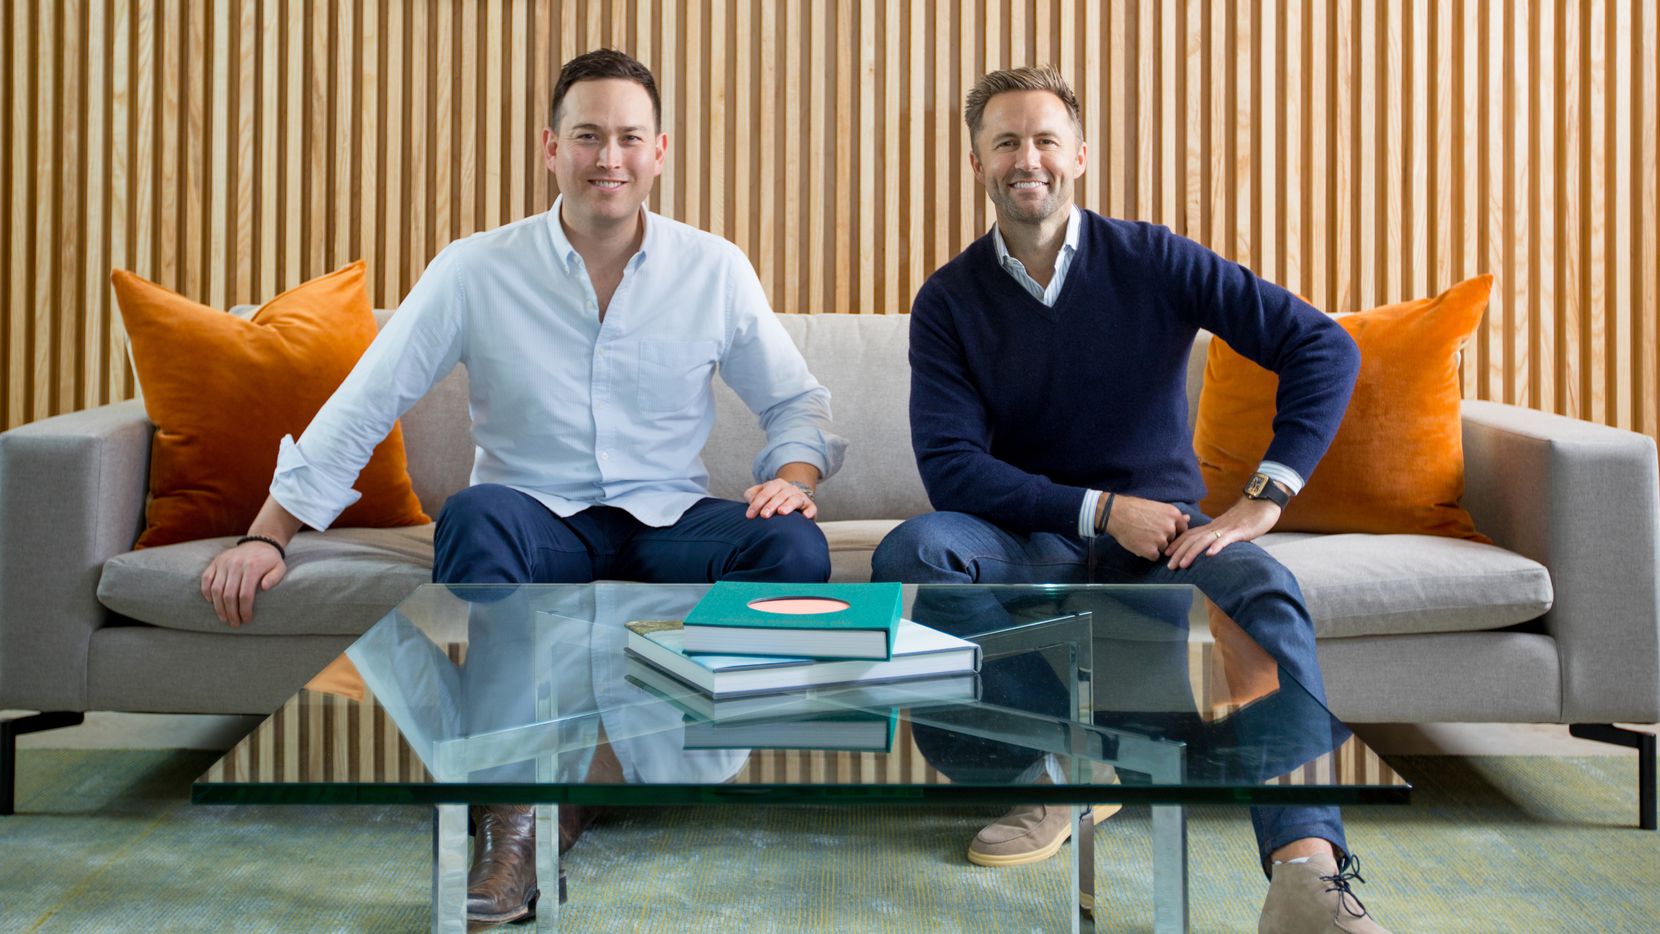 Jonathan Abelmann (left) and Melbourne O'Banion are co-founders of Dallas-based life...